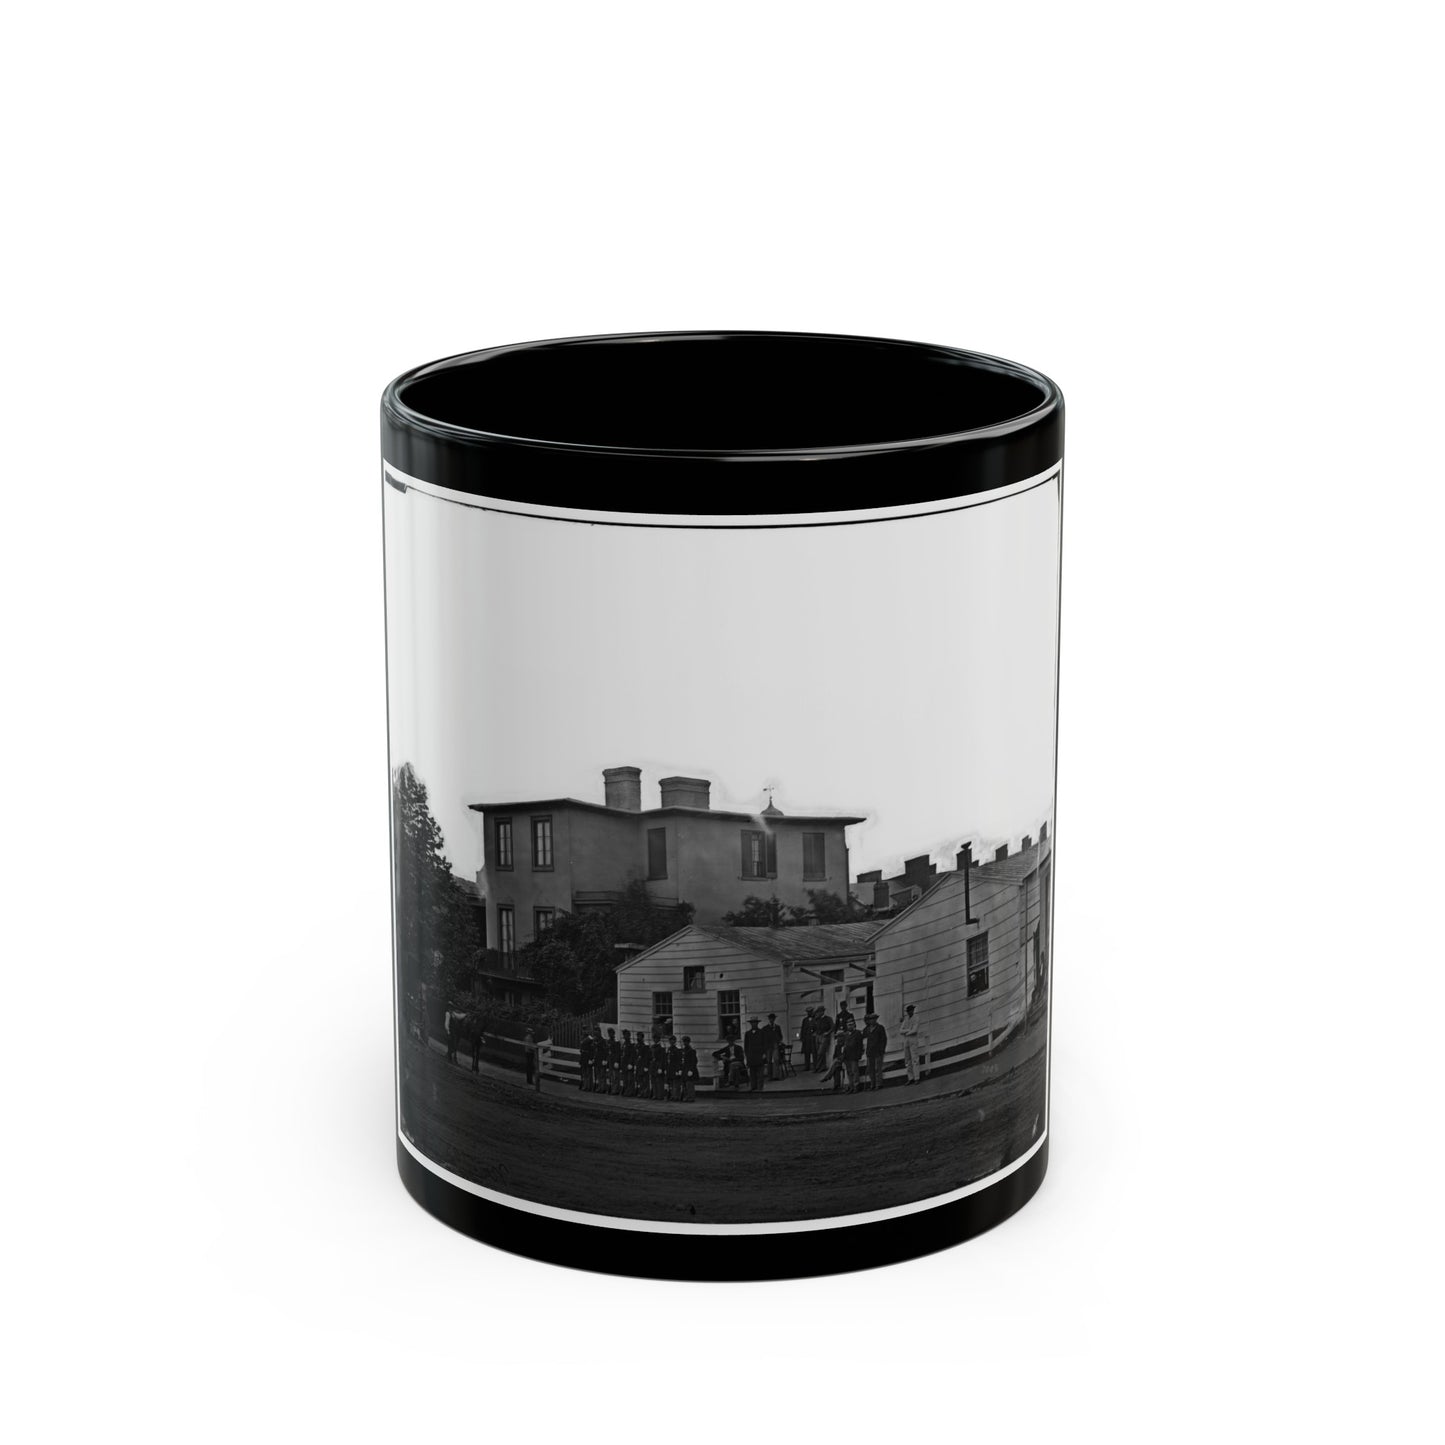 Washington, District Of Columbia. Eight Soldiers In Formation In Front Of Temporary Buildings (U.S. Civil War) Black Coffee Mug